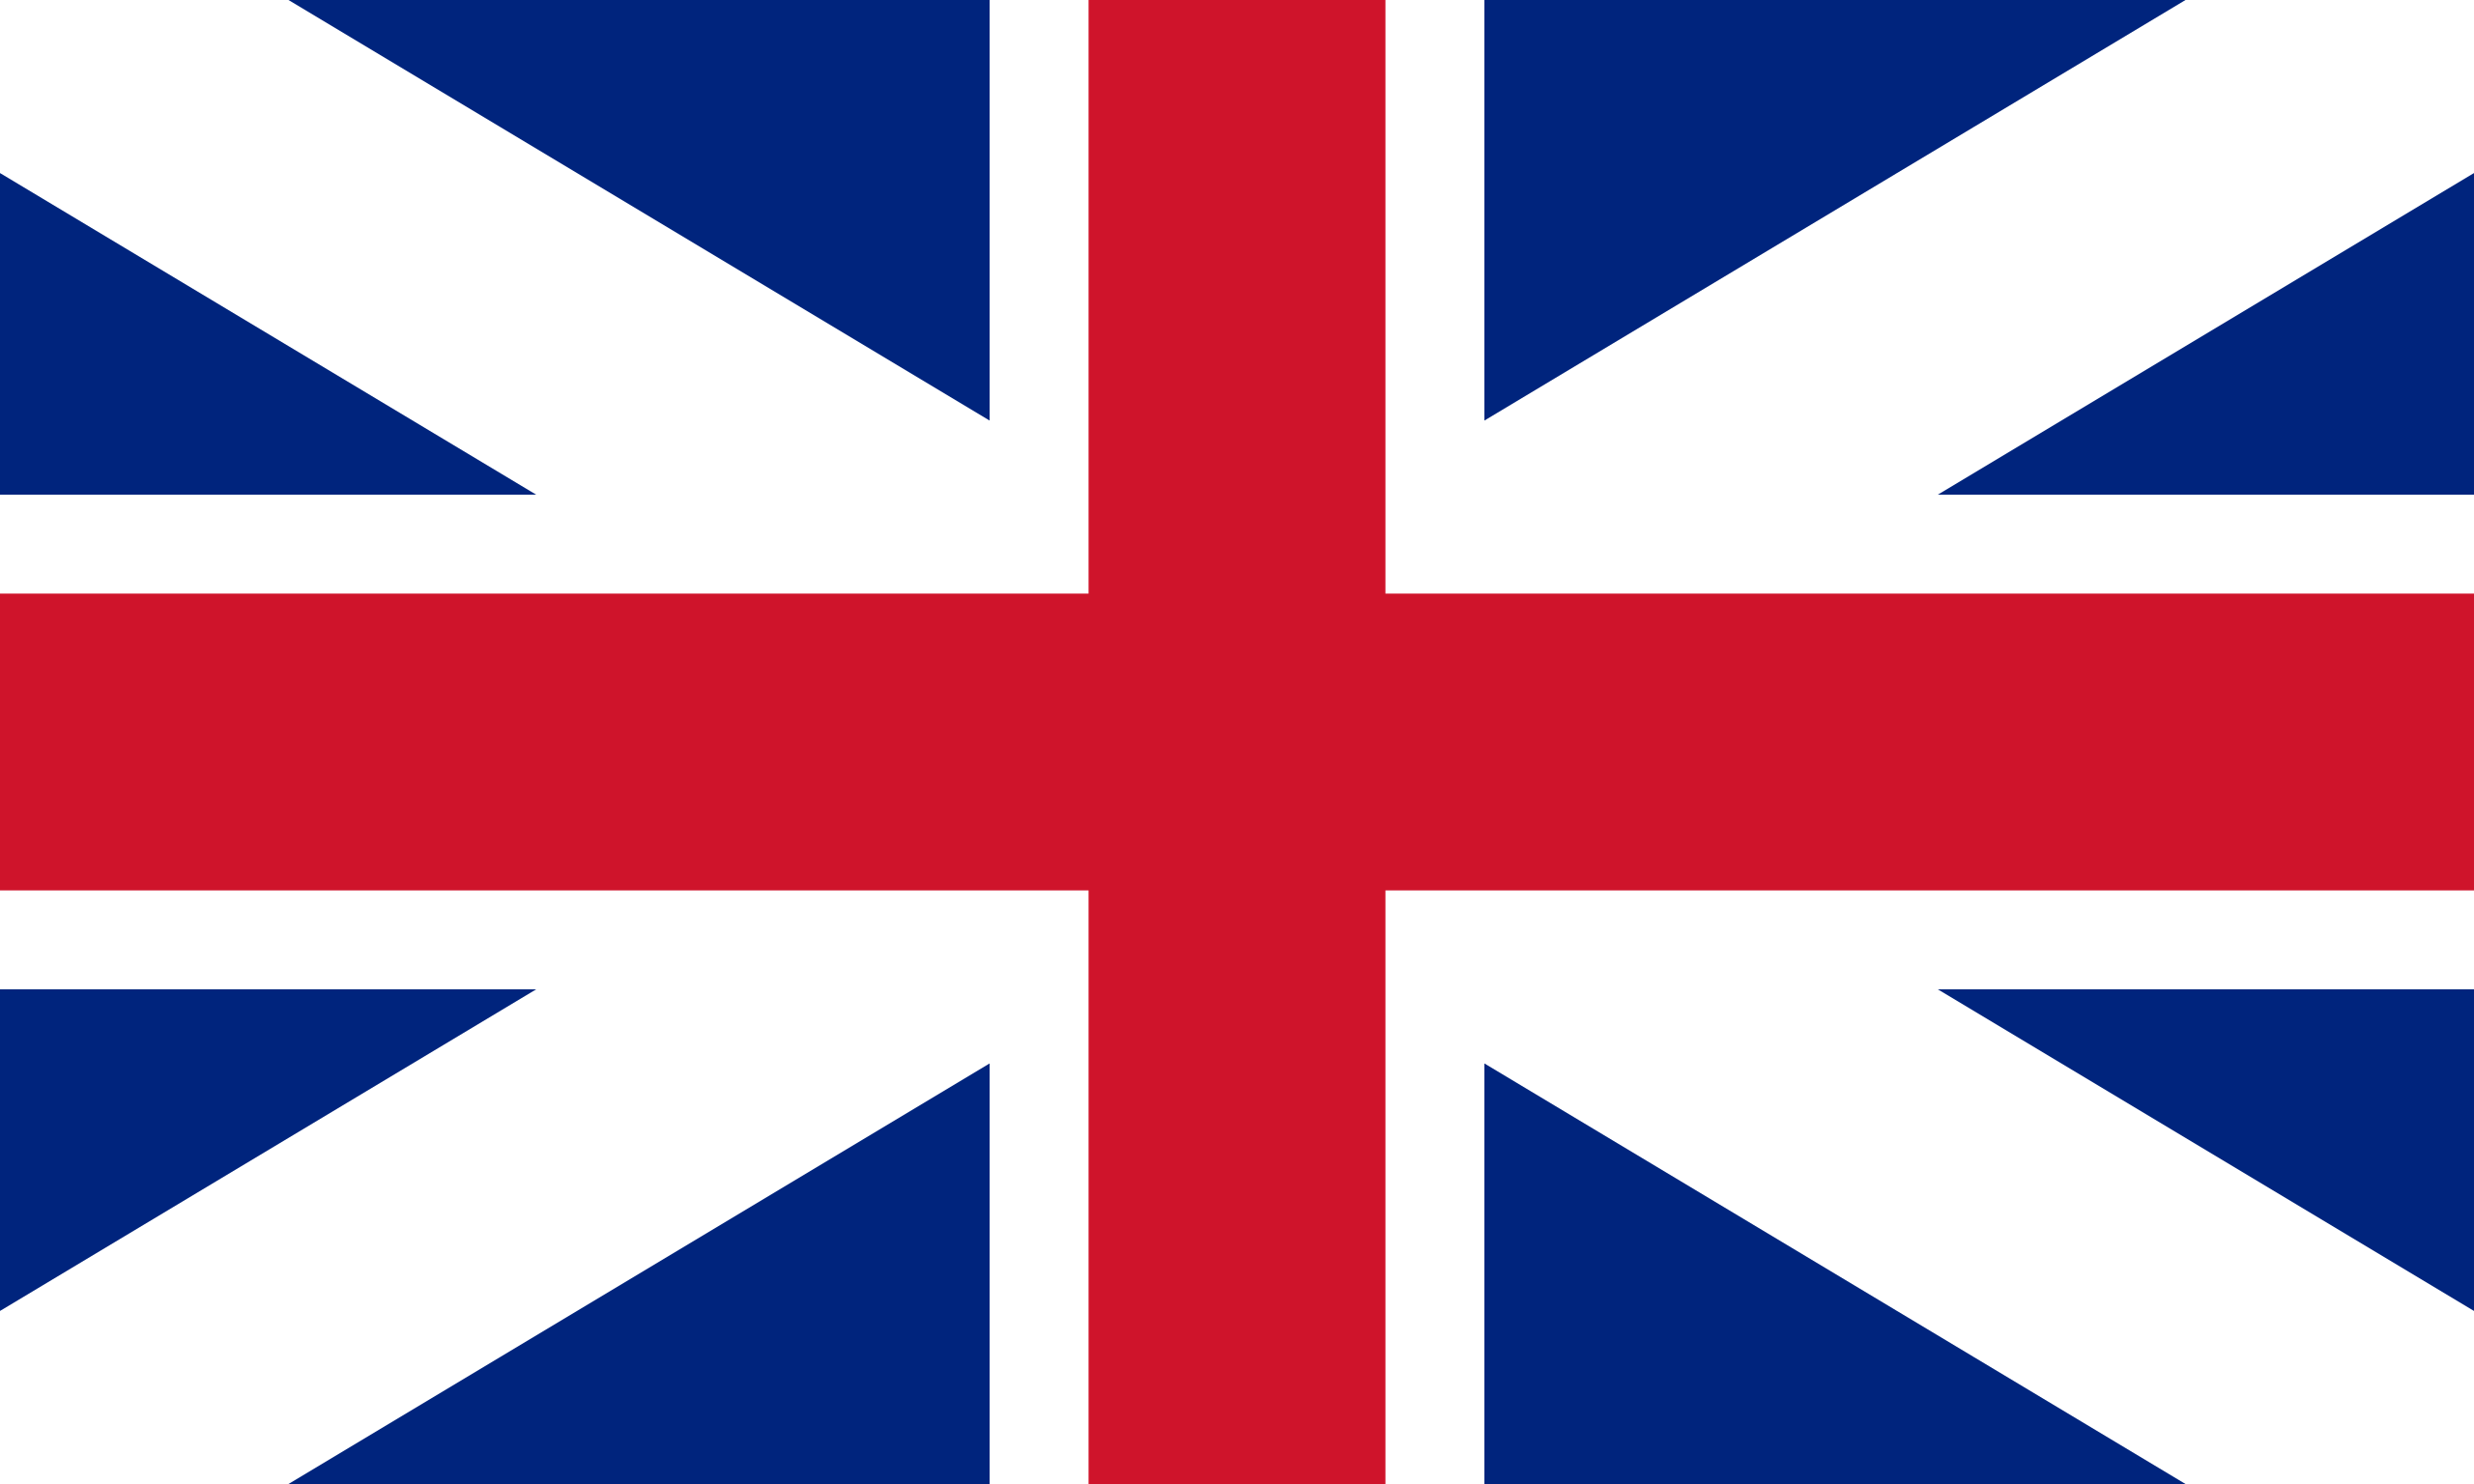 Flag of Great Britain